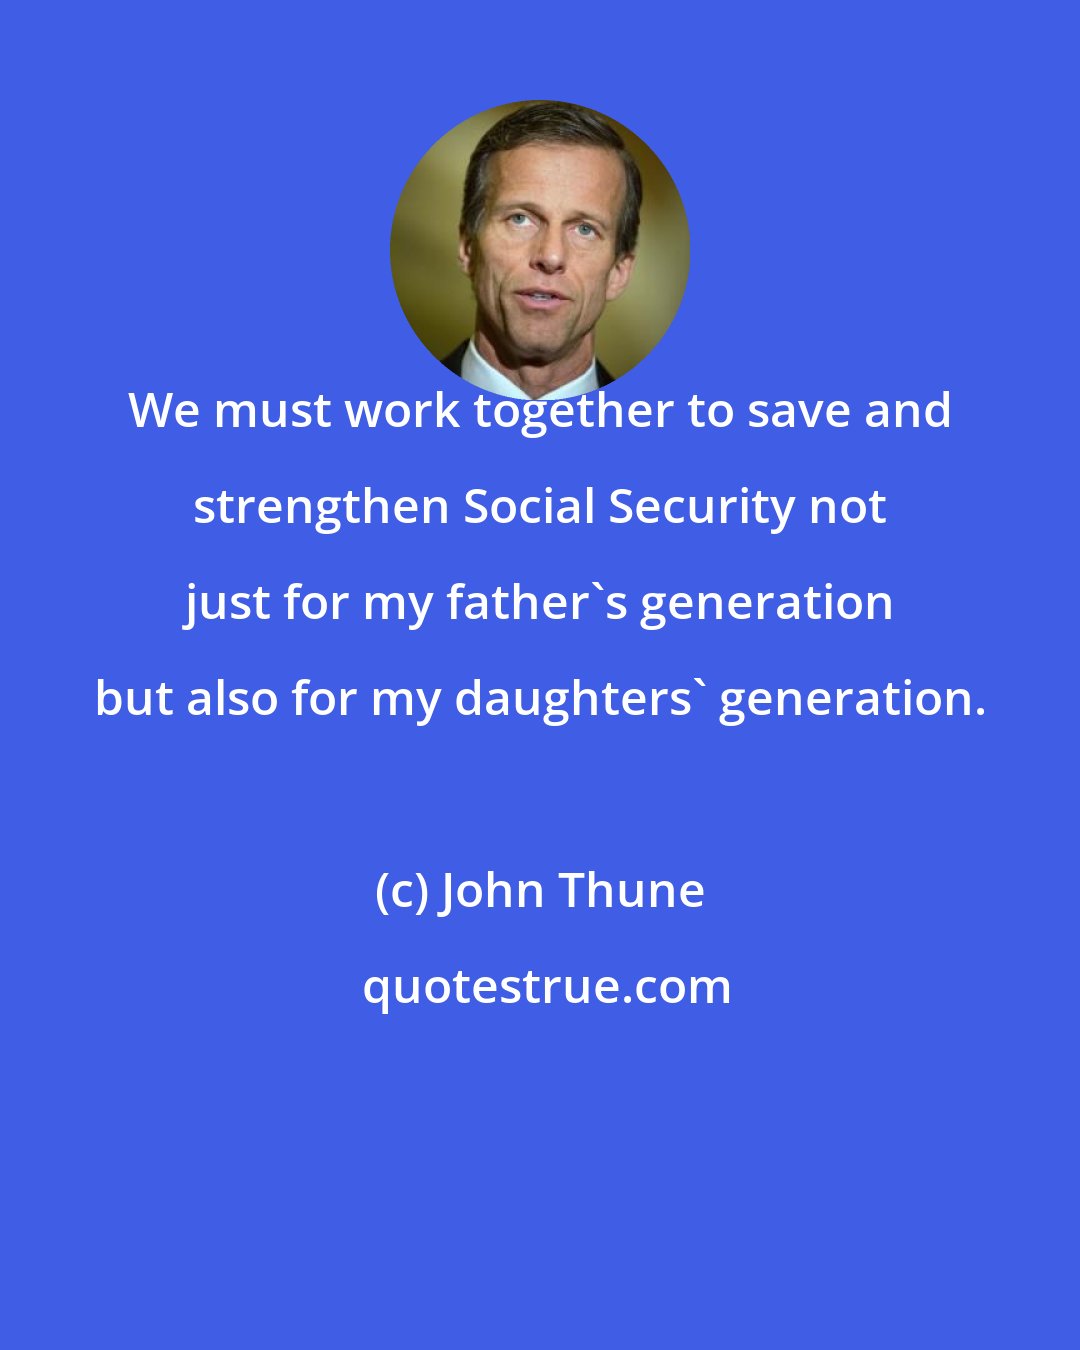 John Thune: We must work together to save and strengthen Social Security not just for my father's generation but also for my daughters' generation.